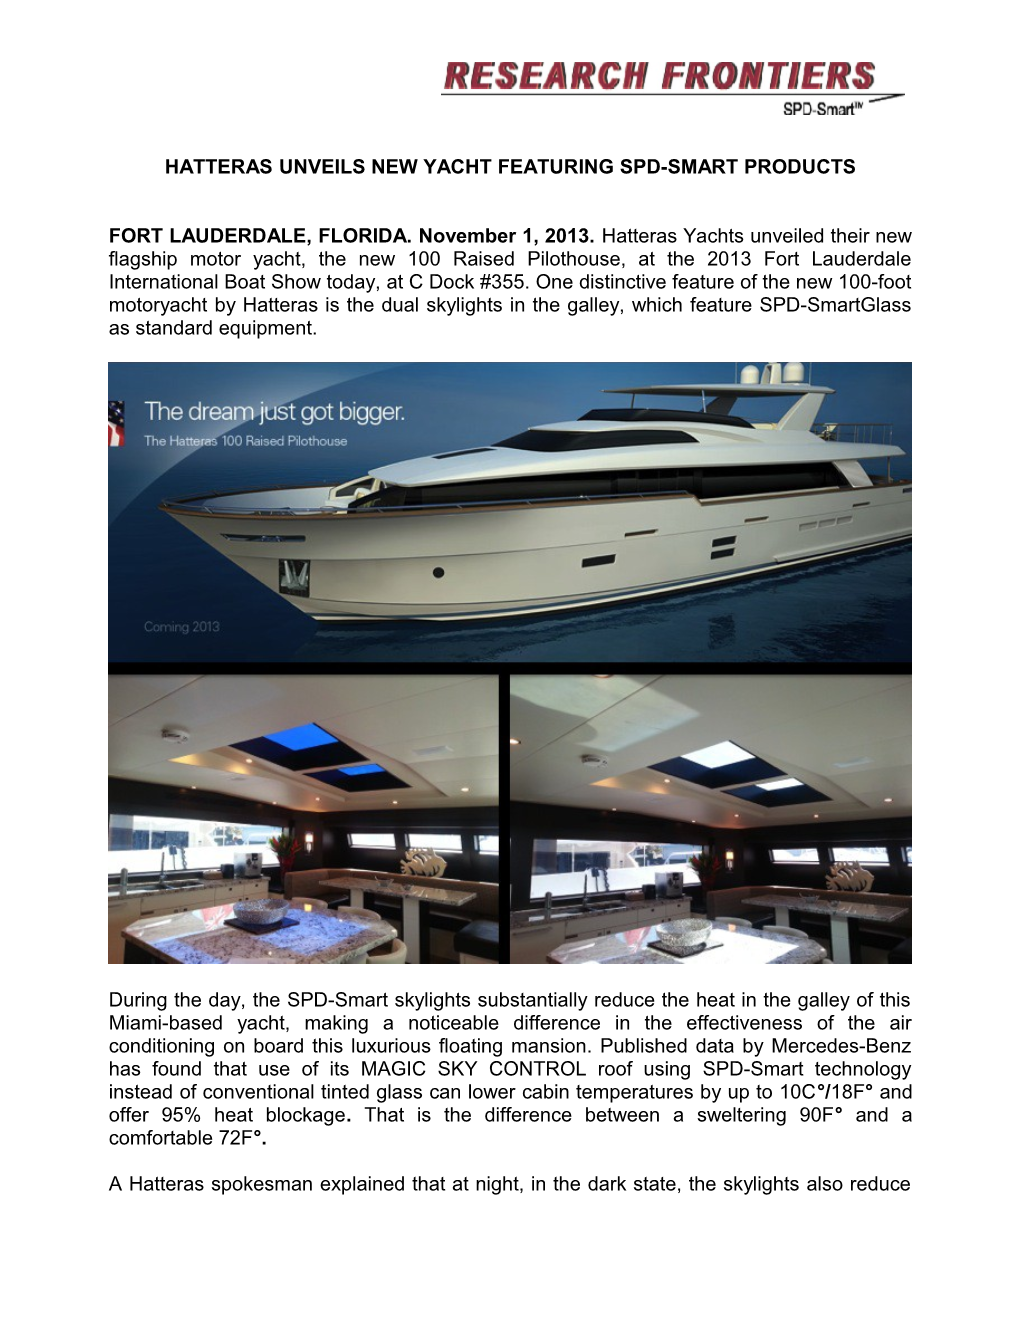 Hatteras Unveils New Yacht Featuring Spd-Smart Products